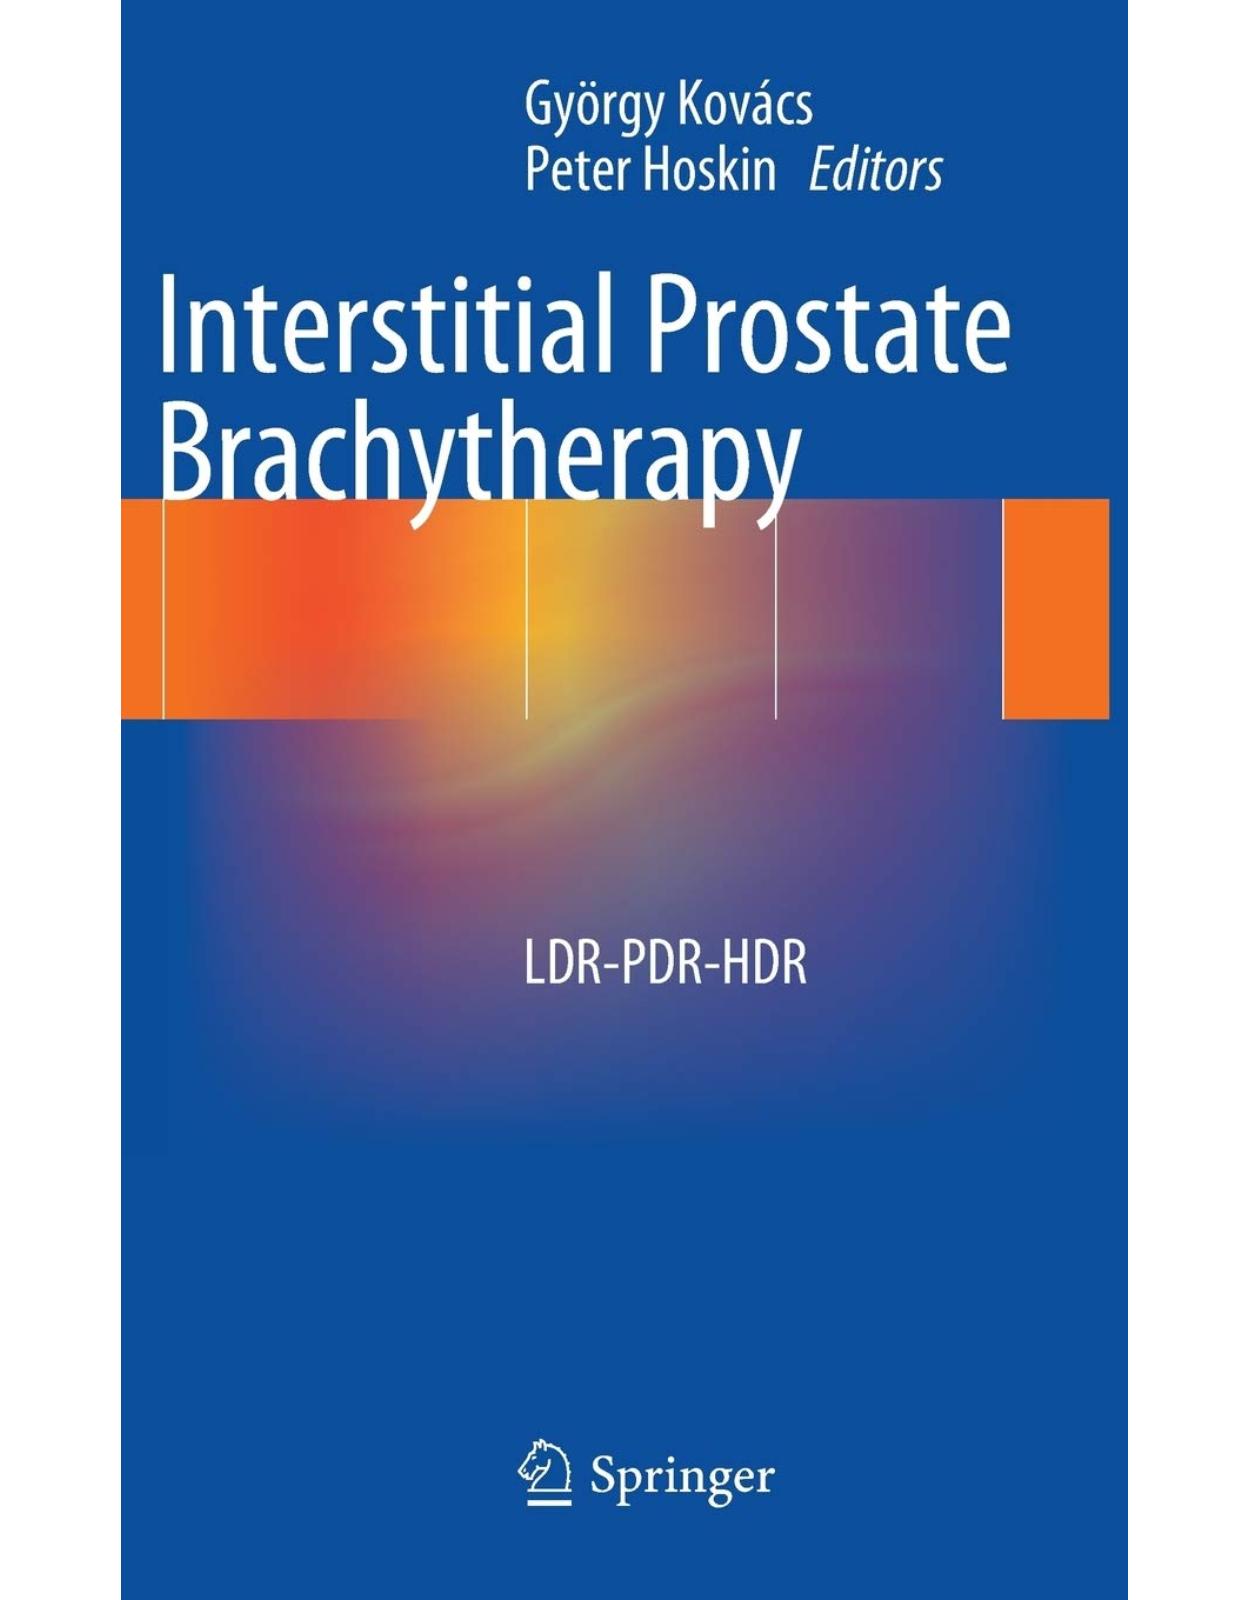 Interstitial Prostate Brachytherapy: Ldr-PDR-Hdr